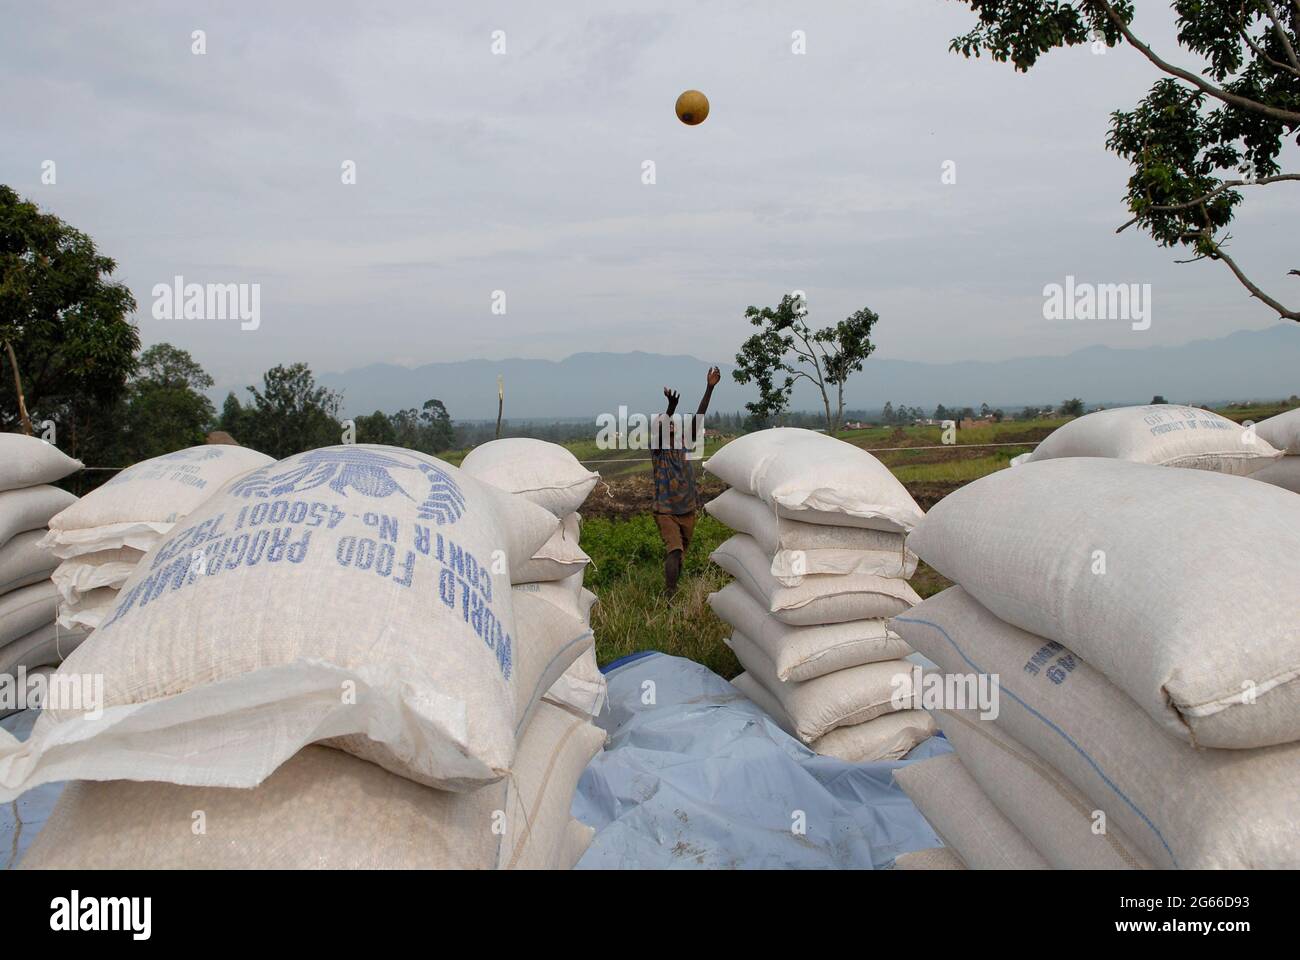 Young internally displaced boy playing amid piles of sacks containing basic foodstuff at a World Food Programme WFP distribution point in North Kivu province, DR Congo Africa Stock Photo